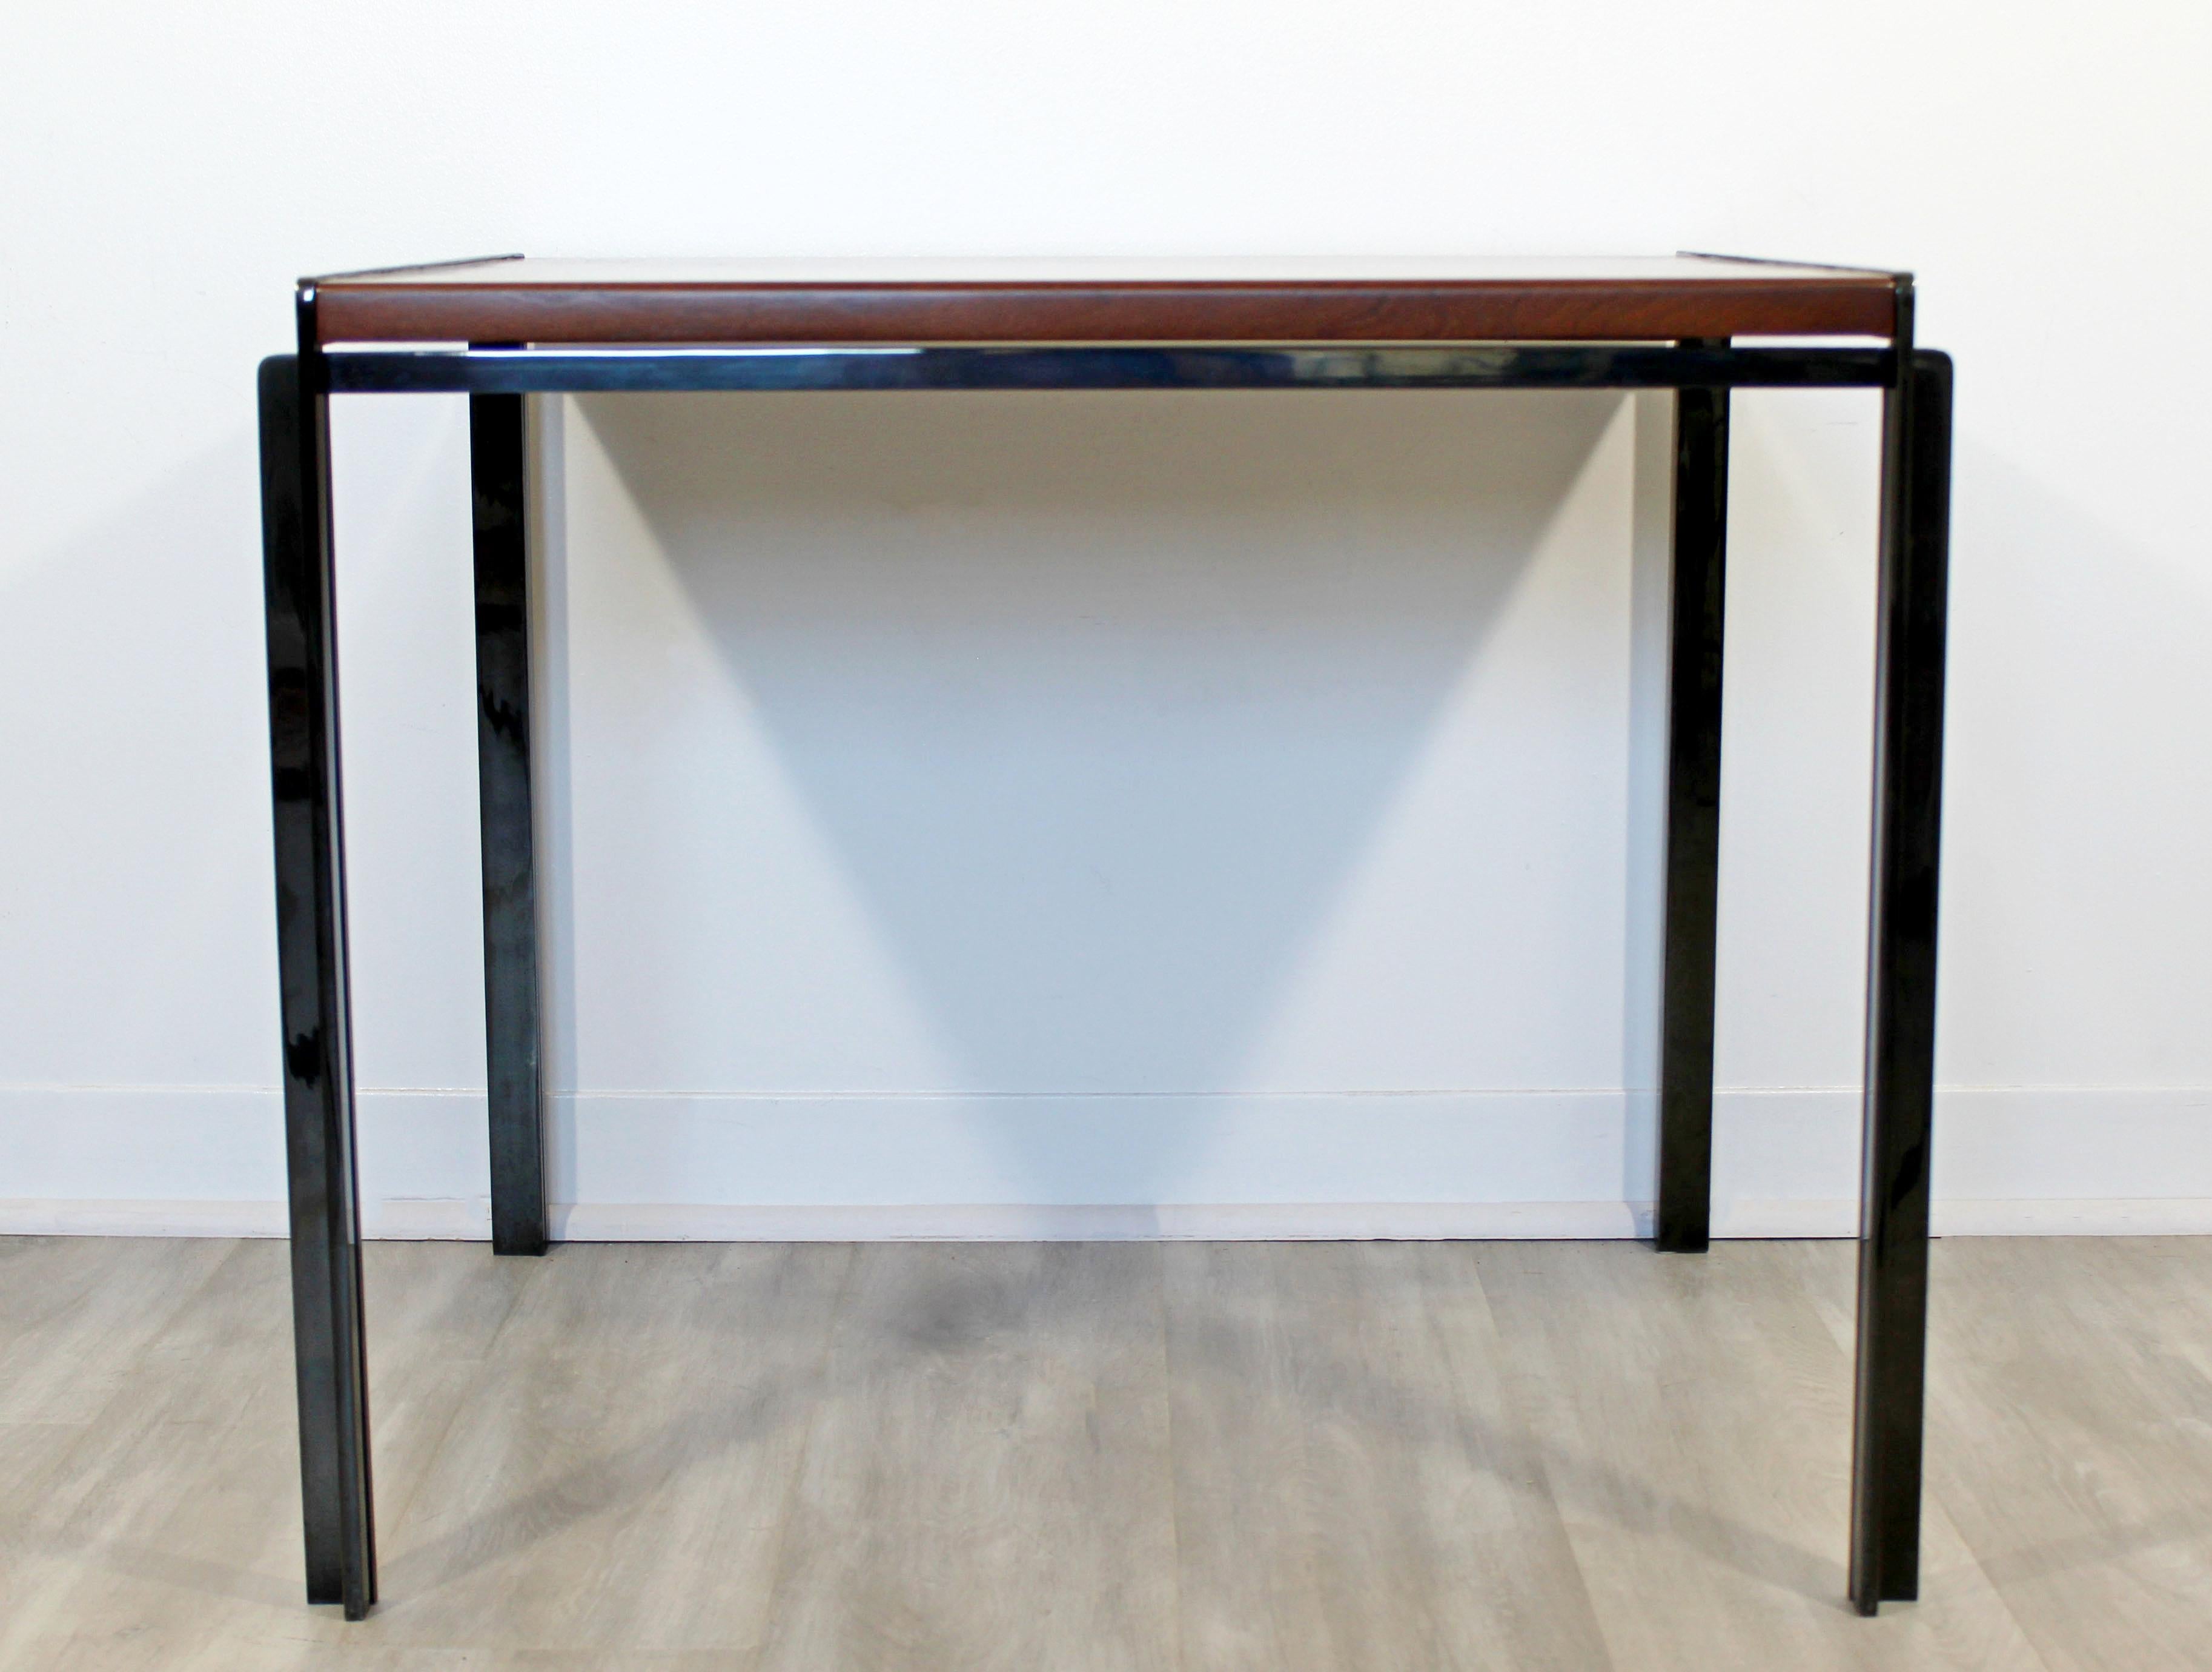 For your consideration is a gorgeous accent corner table, with a gunmetal base, by Richard Shultz for Knoll, circa 1990s. In excellent condition. The dimensions are 29.5